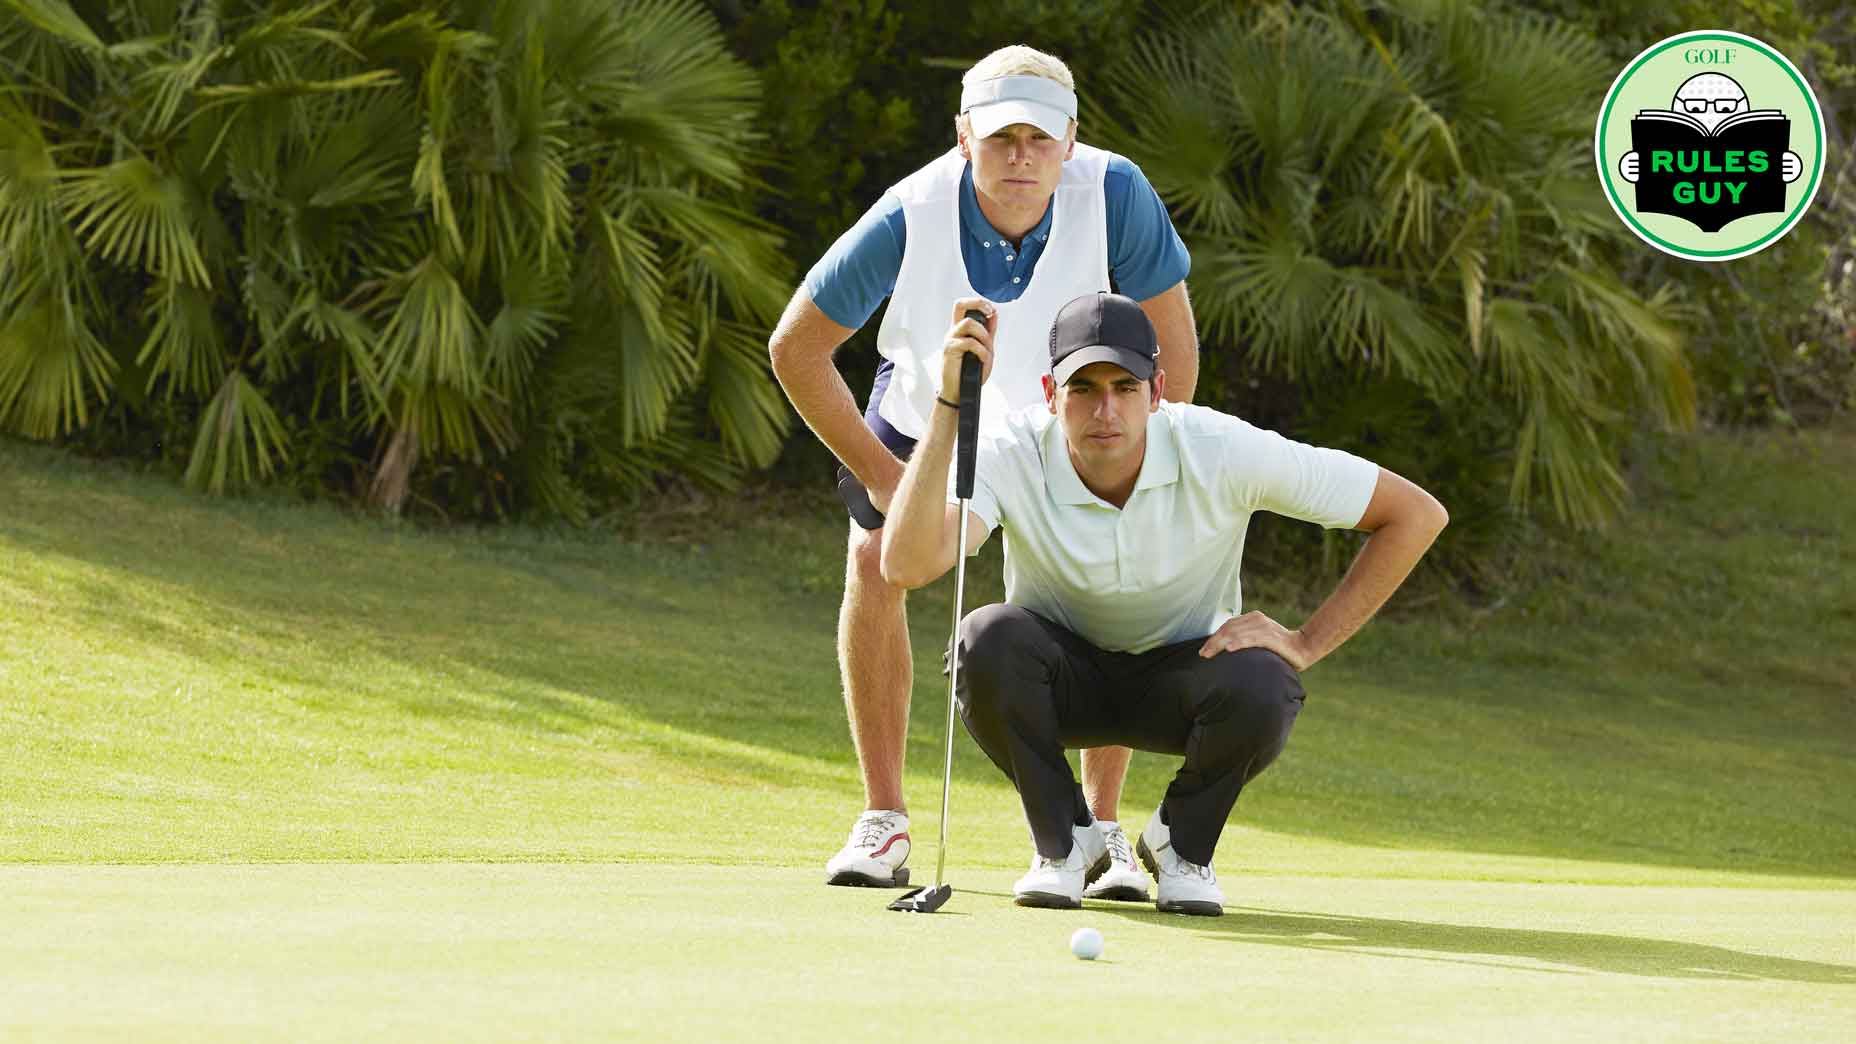 Caddie and player looking at a putt